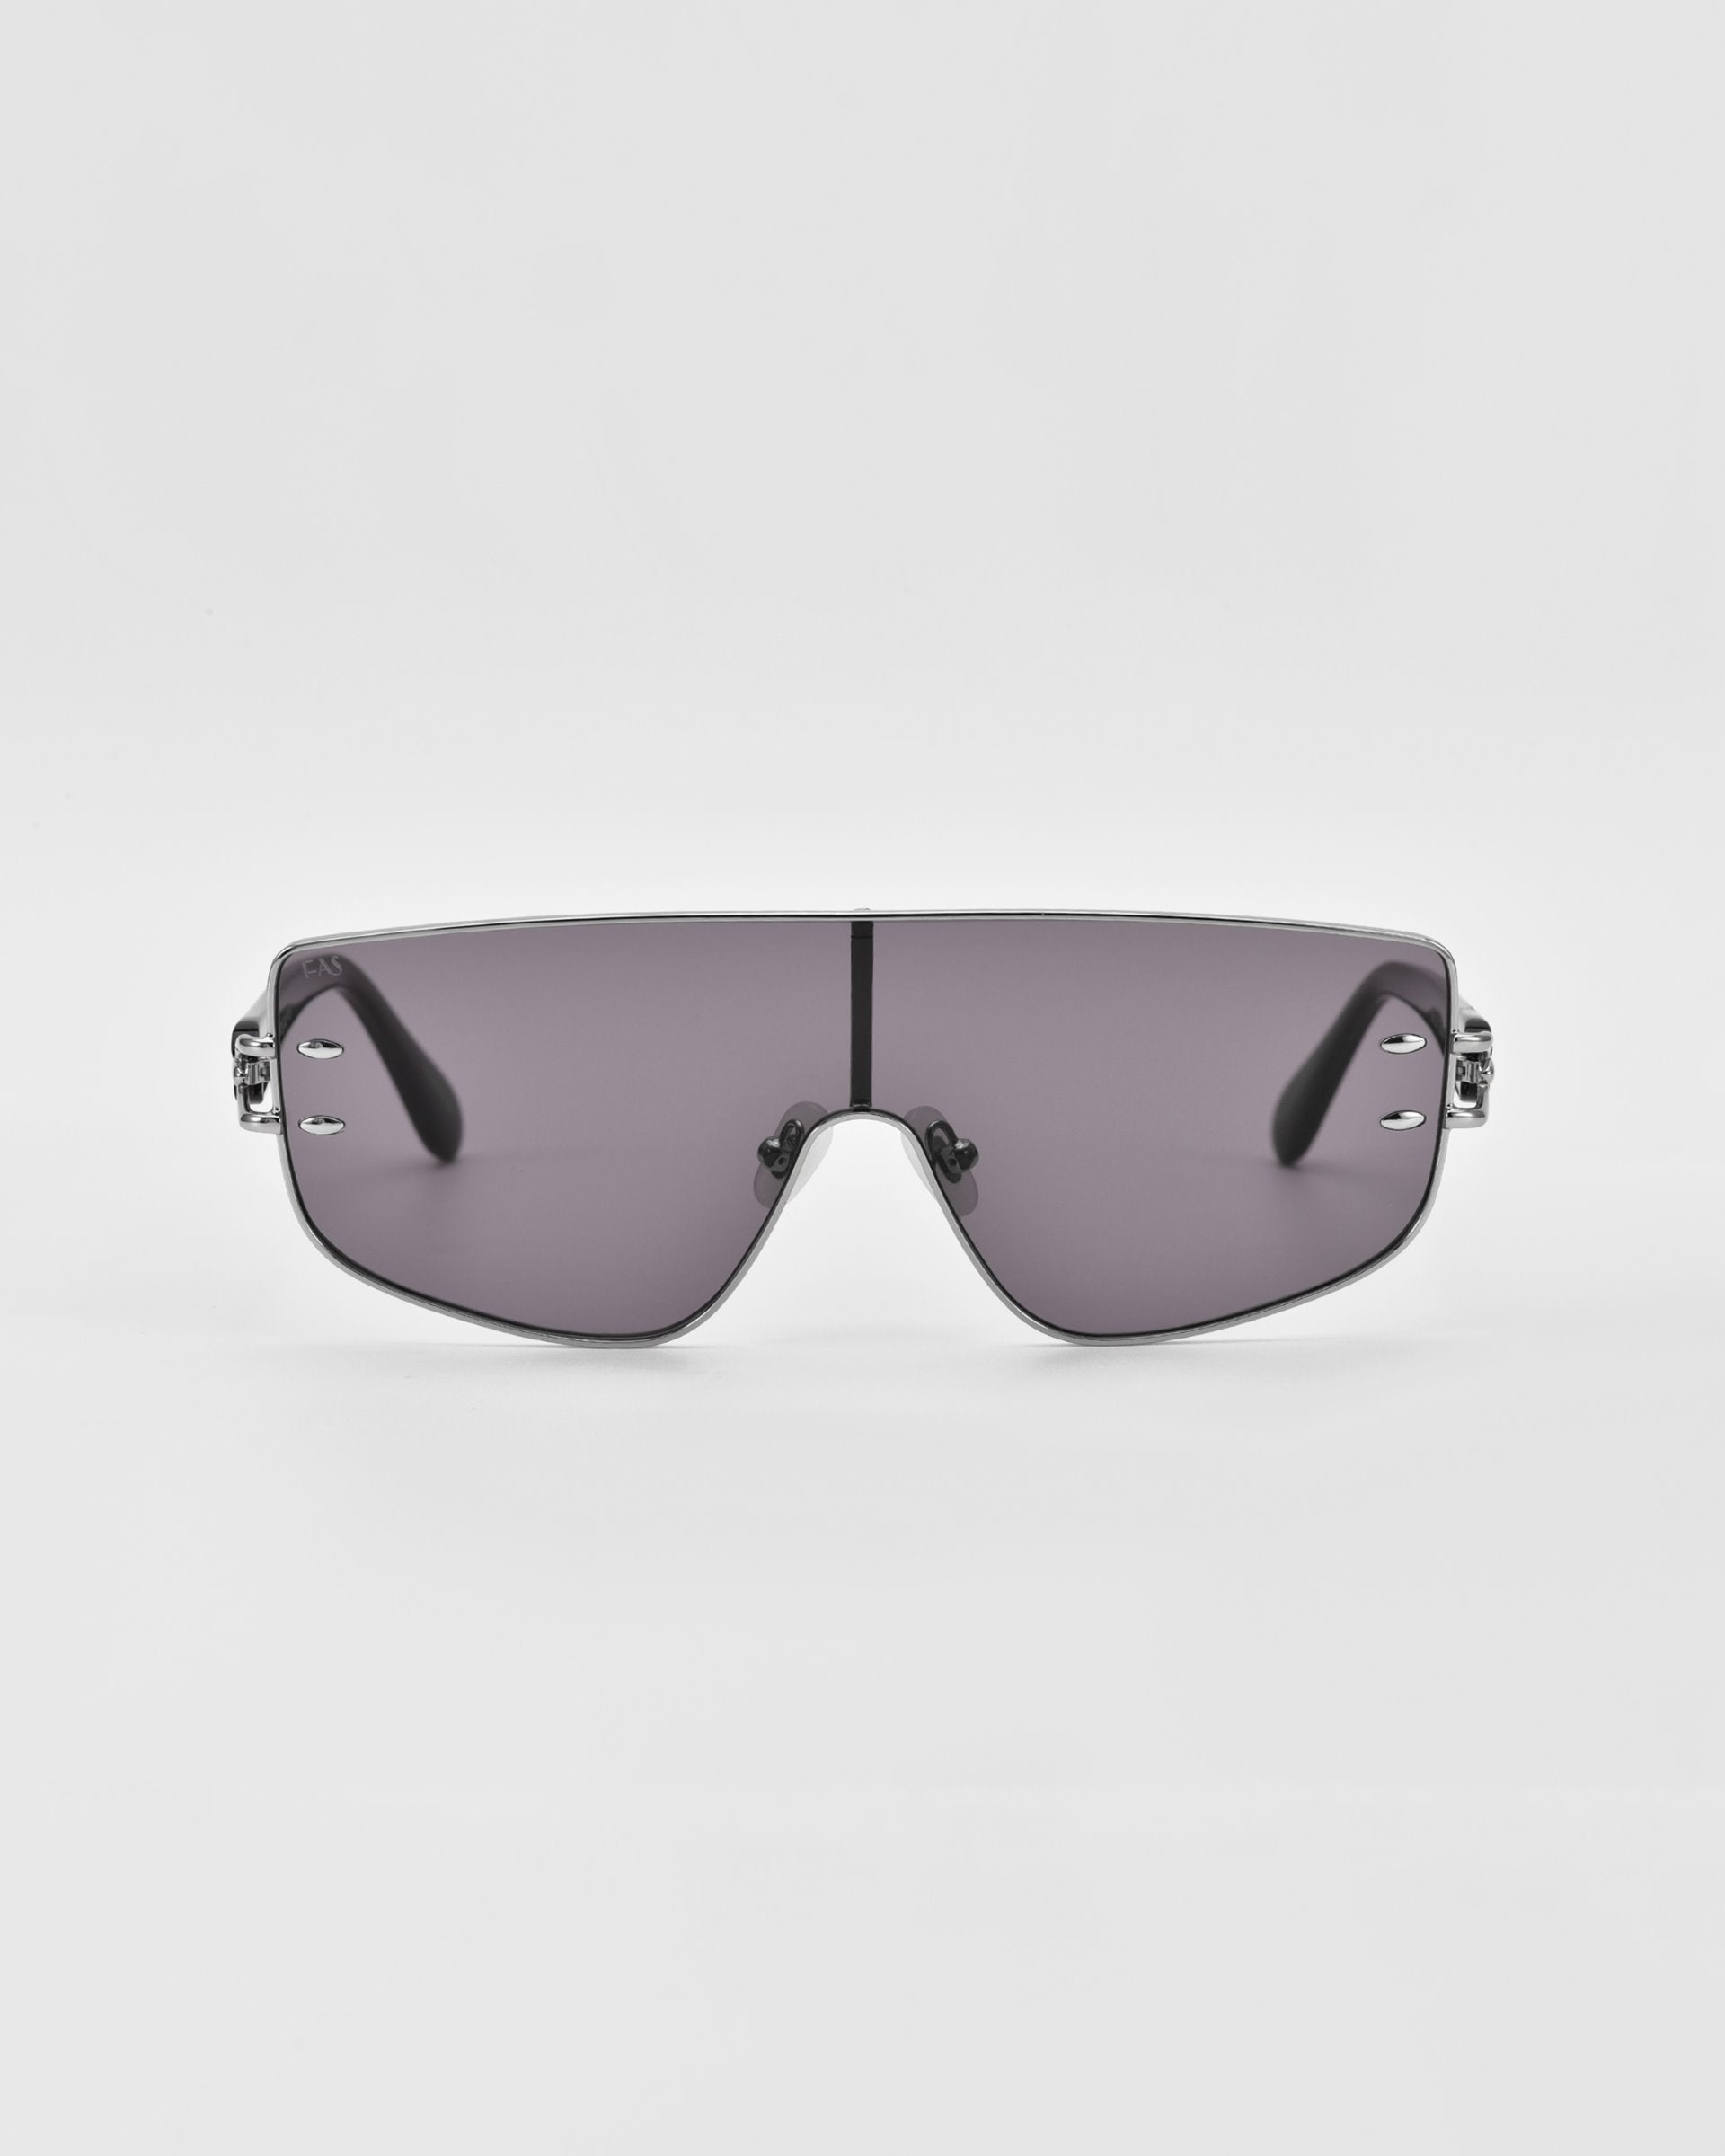 Introducing the Flare sunglasses by For Art&#39;s Sake®—a pair of futuristic-style luxury eyewear featuring a single, continuous gray-tinted lens and thin, black arms. The minimalistic nose bridge complements the sleek, slightly curved design of the lens. Set against a plain white background, these are the epitome of modern elegance.